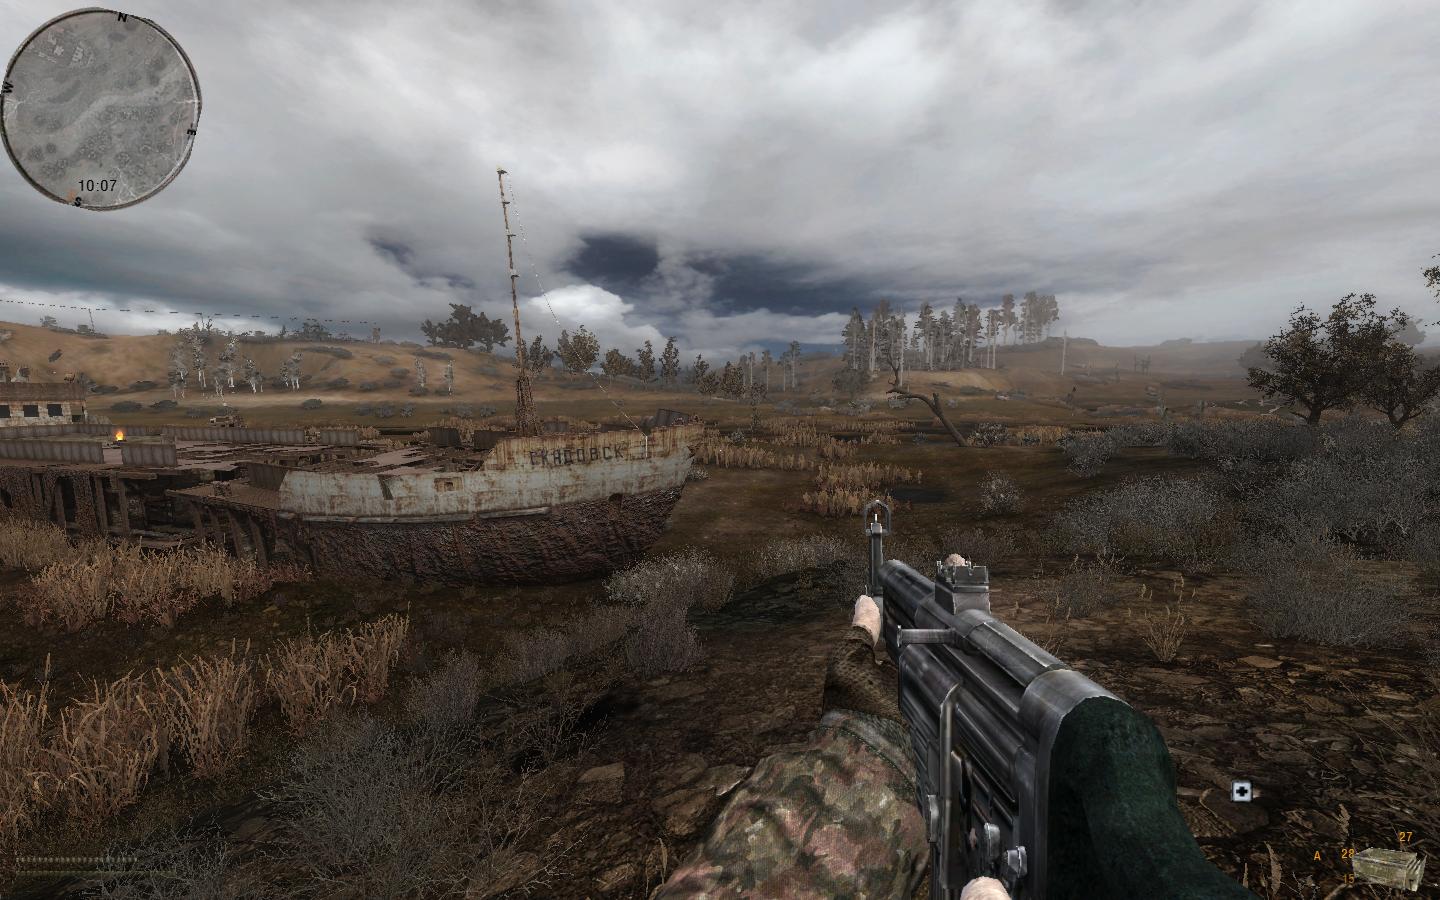 One mod - and "Stalker" turns into a real survival simulator